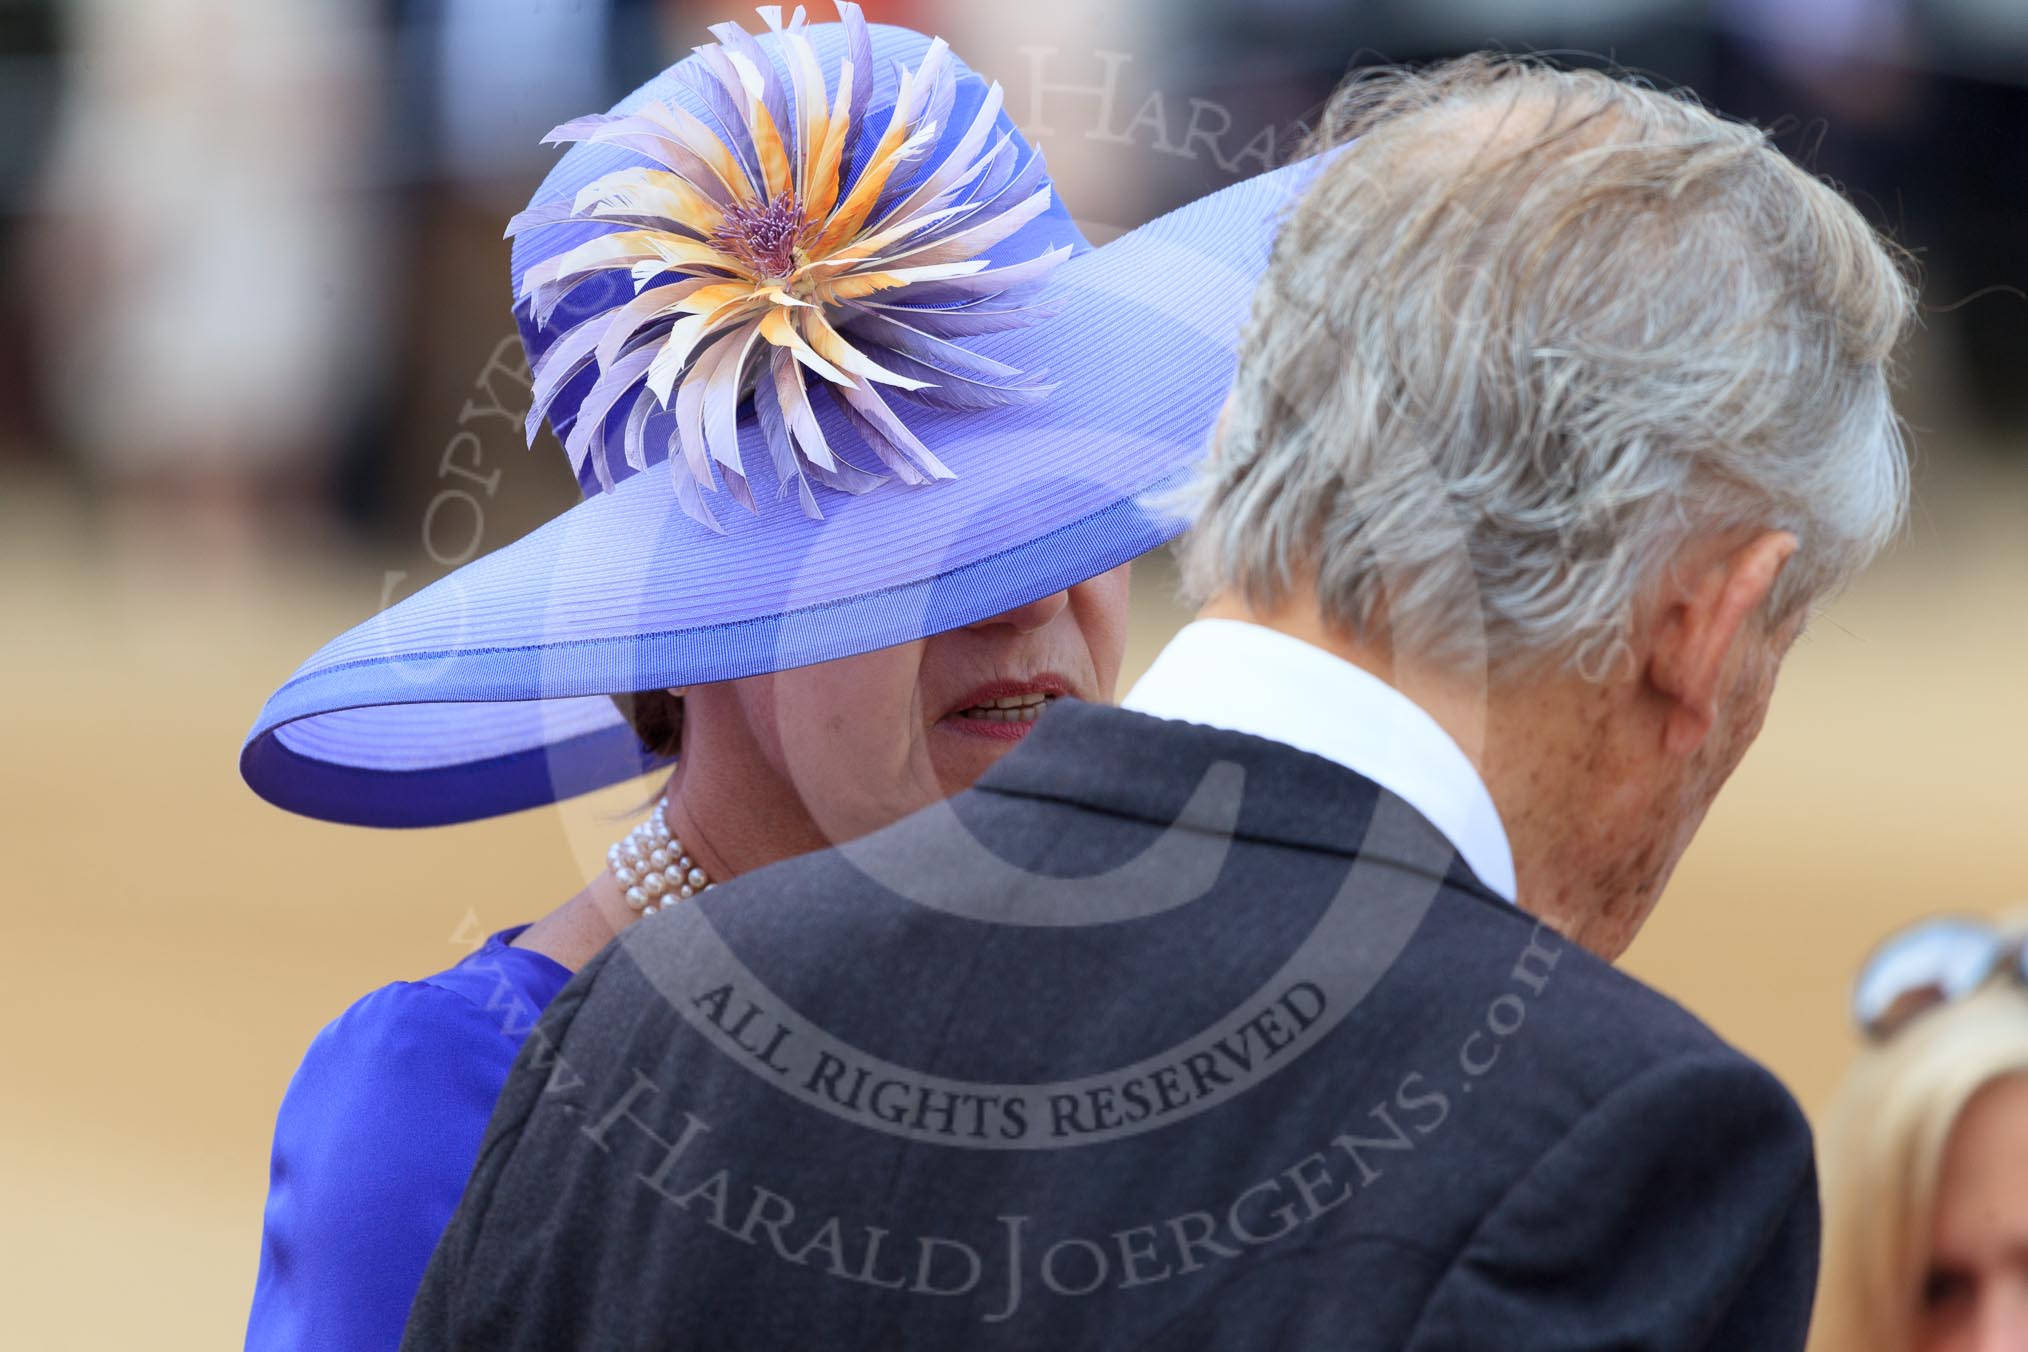 Woman with spectacular blue hat at Trooping the Colour 2018, The Queen's Birthday Parade at Horse Guards Parade, Westminster, London, 9 June 2018, 09:38.